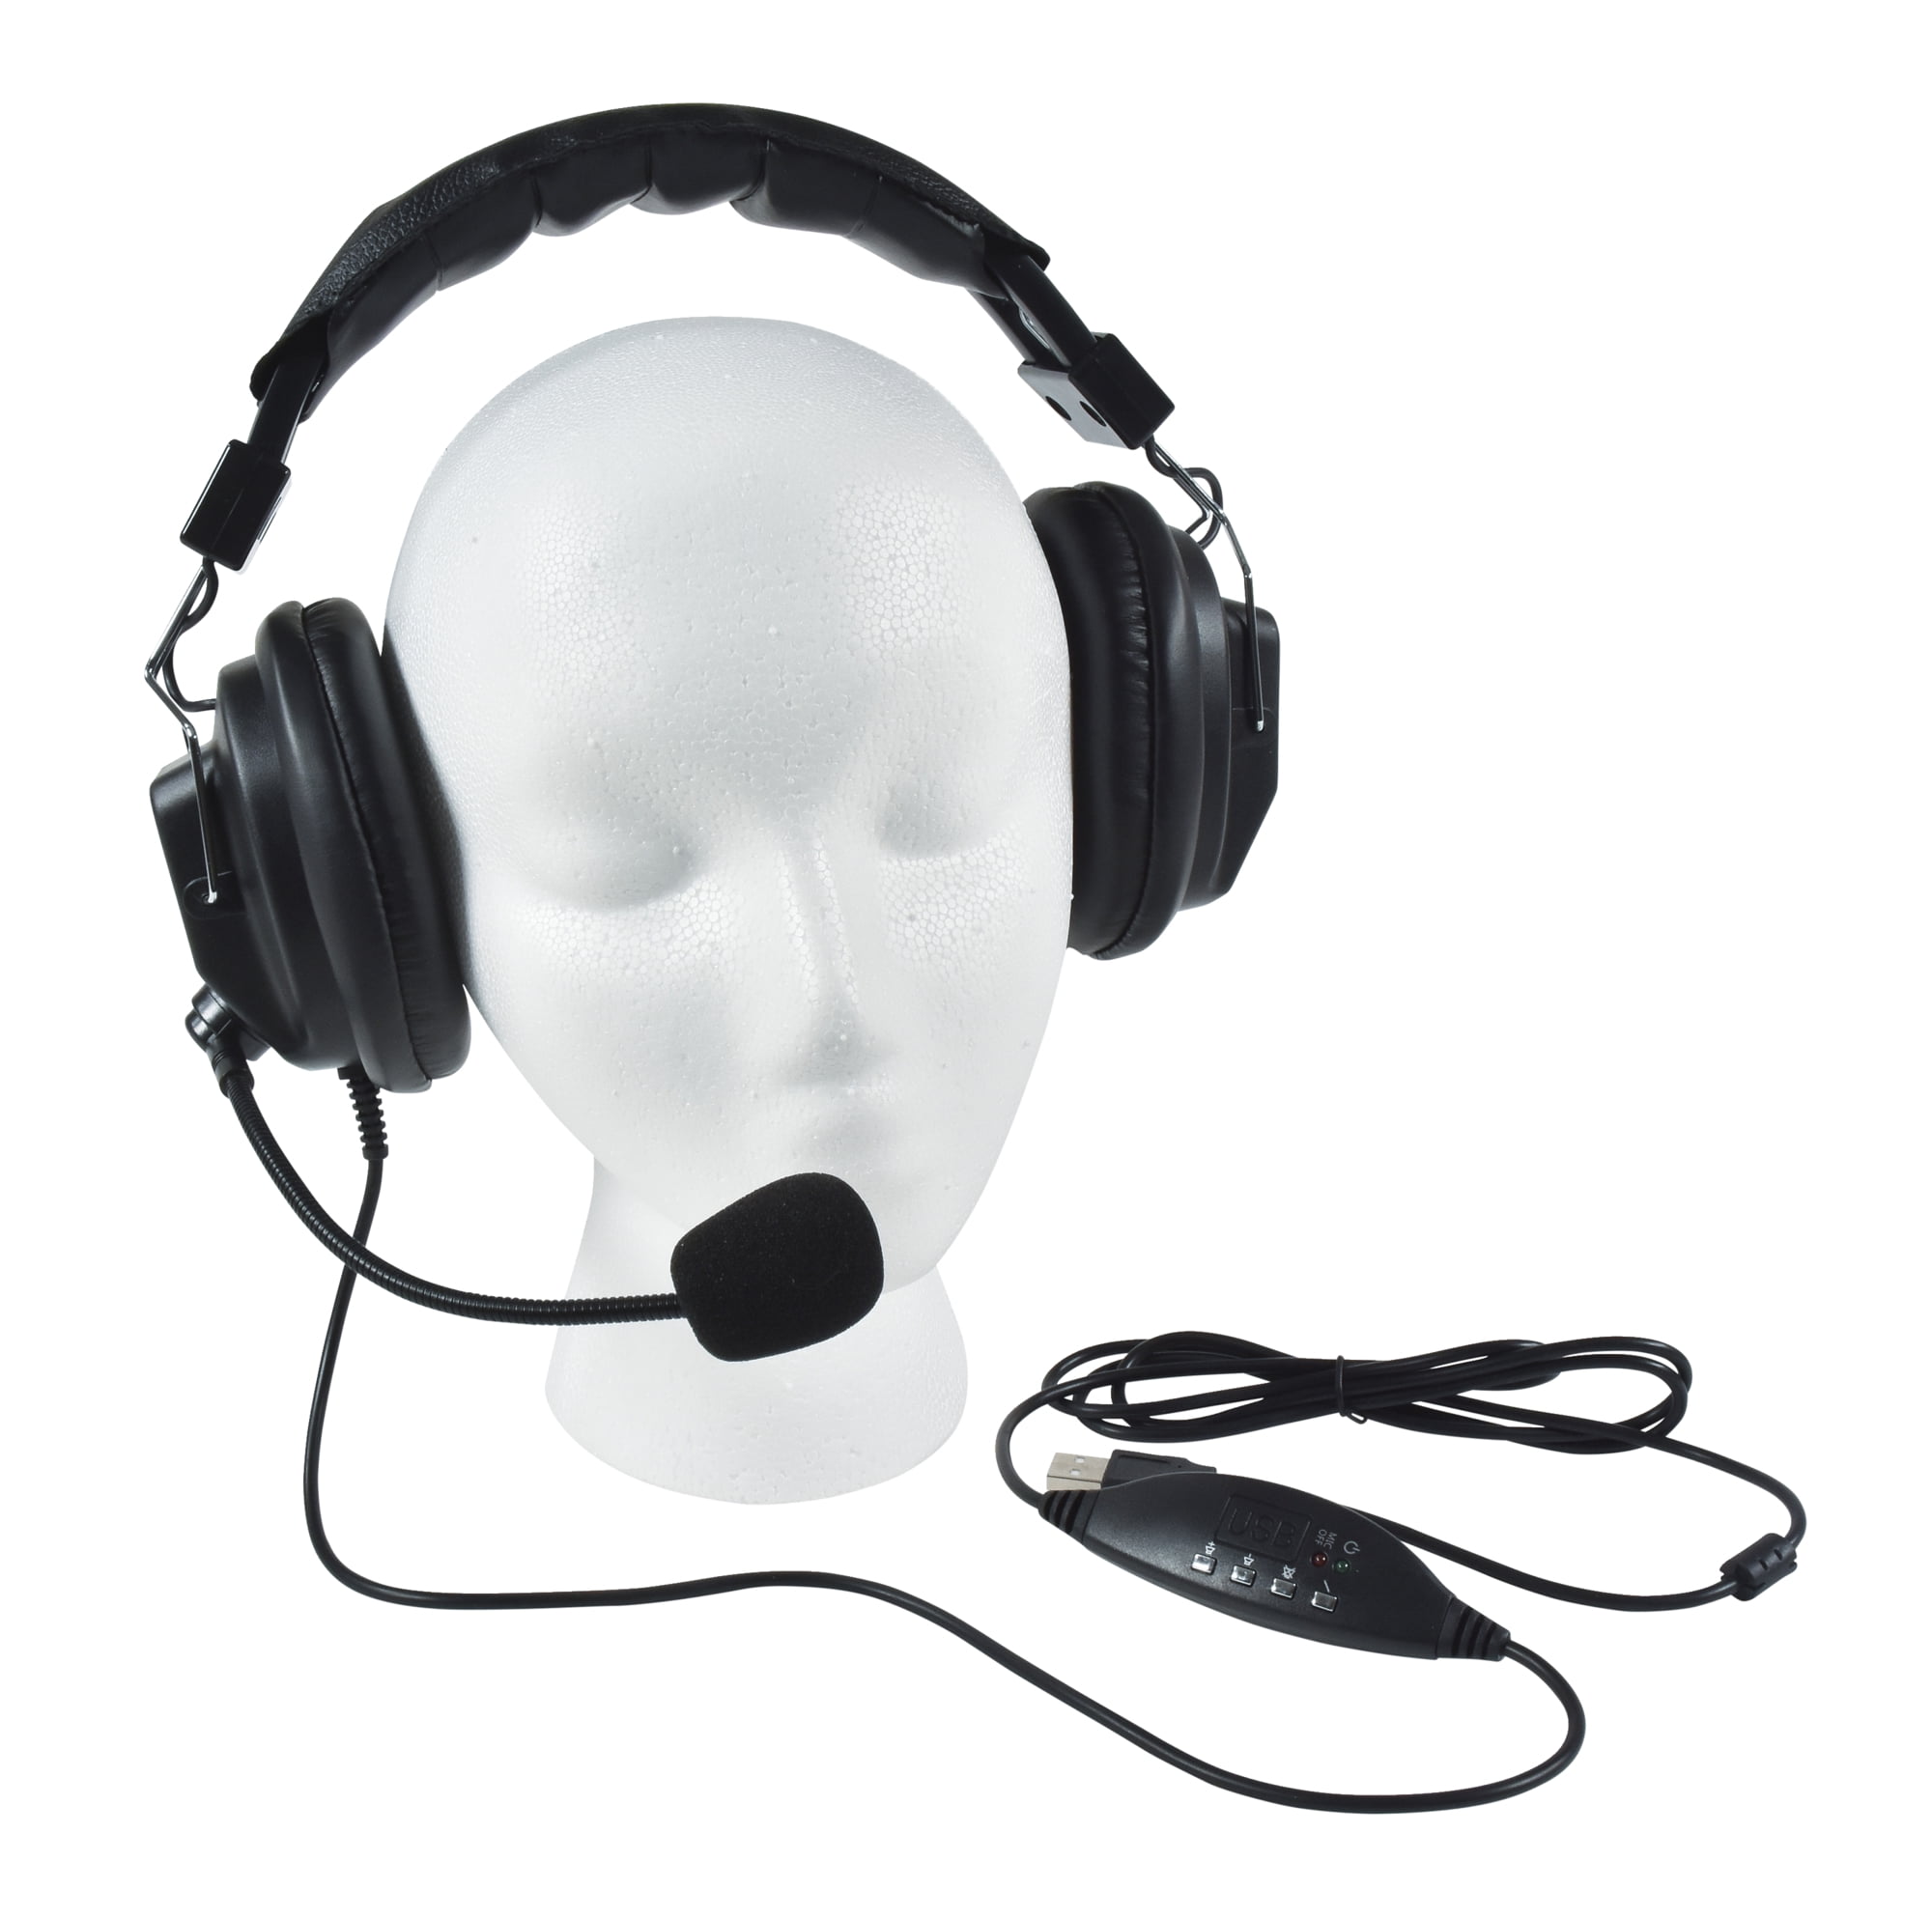 Califone 3068MUSB Over-Ear Stereo Headset with Gooseneck